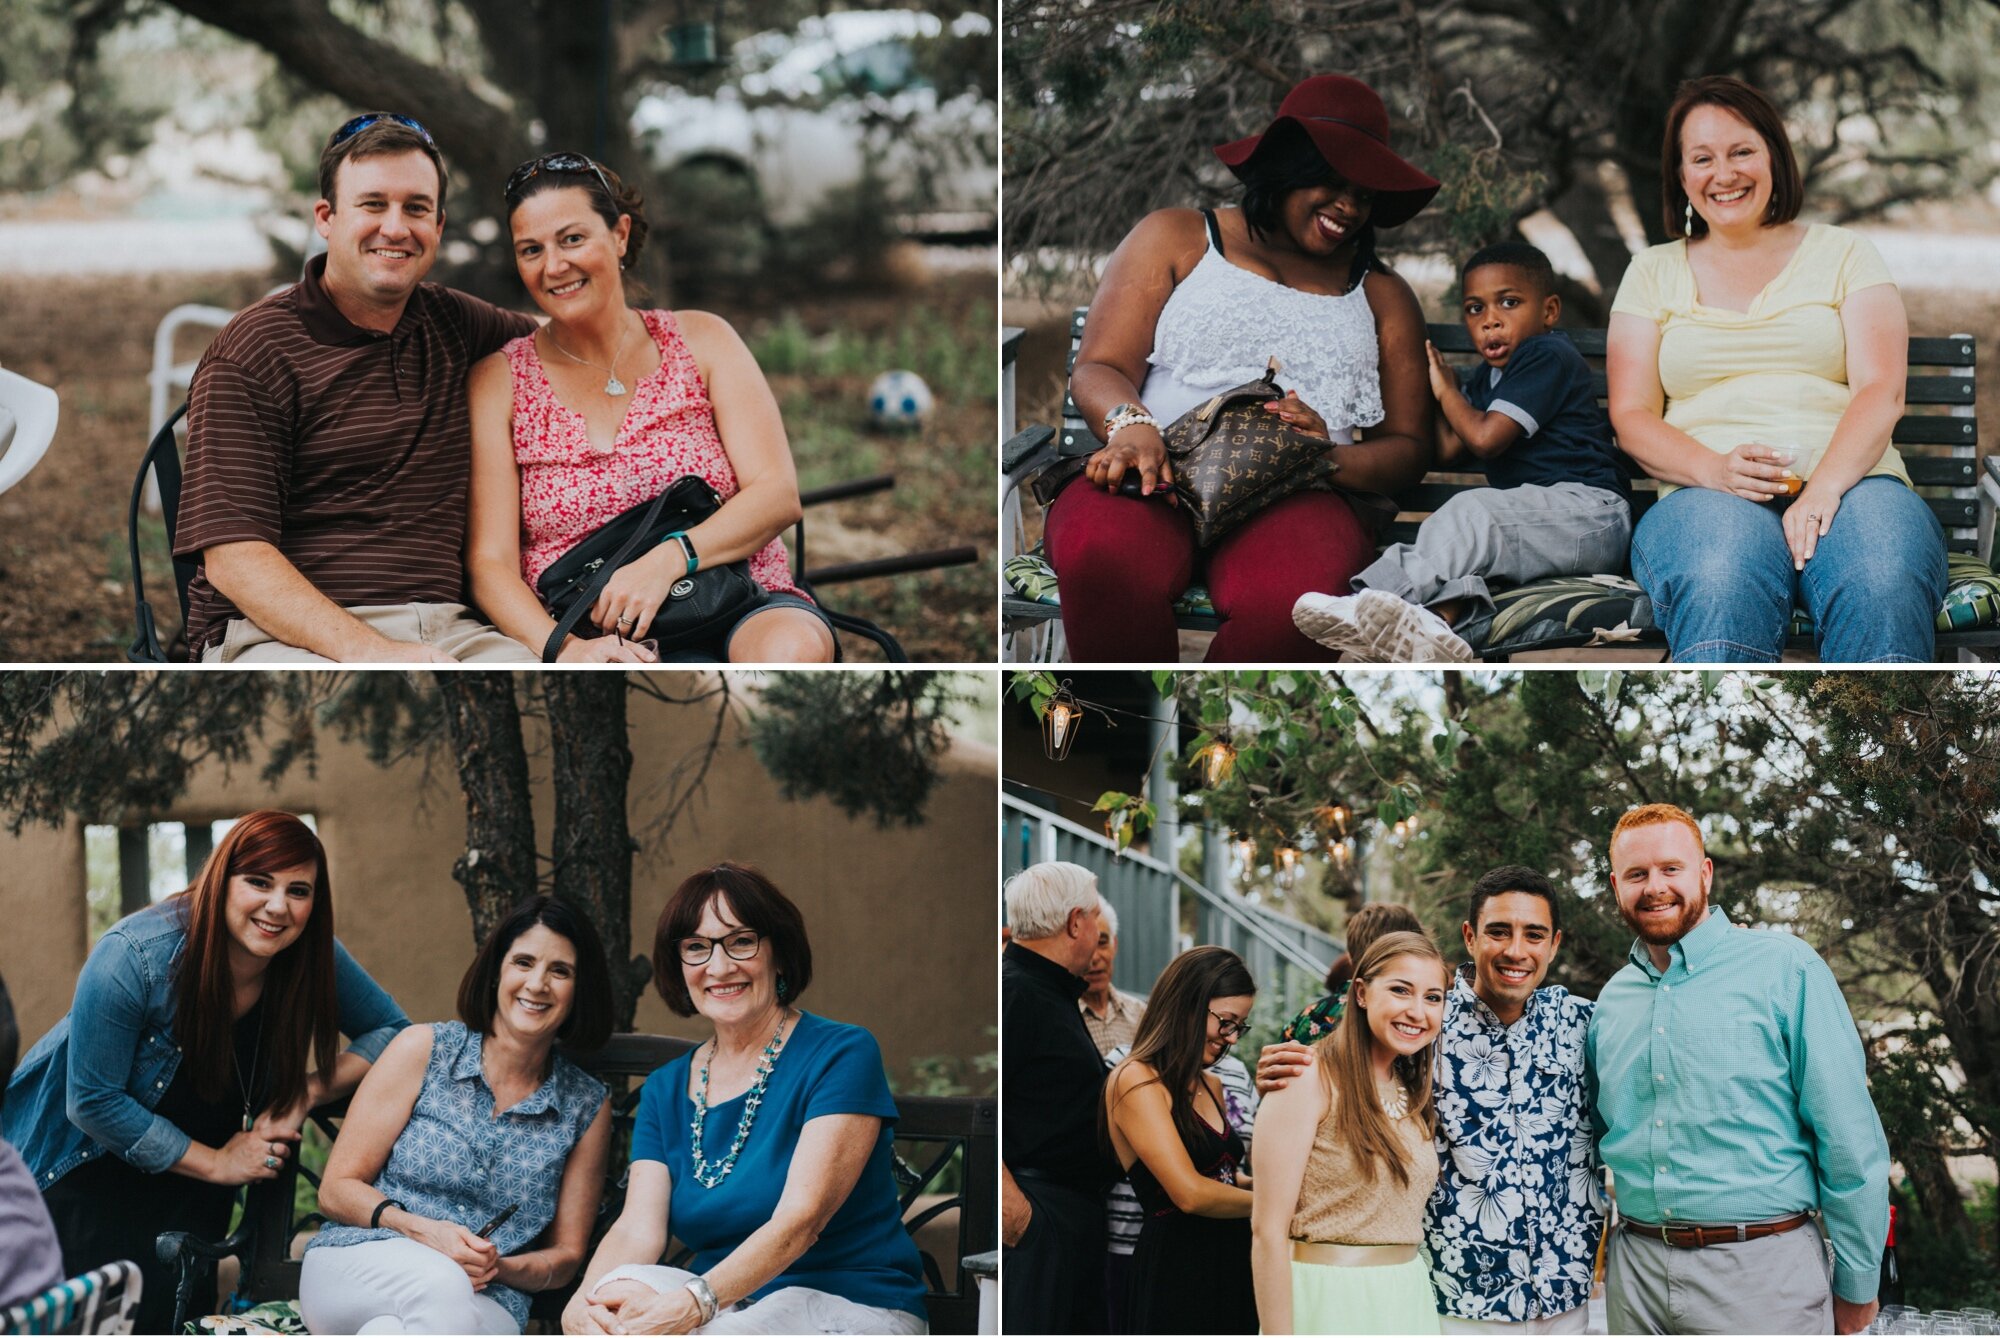  Katie and Frankie had one of the greatest Santa Fe rehearsal dinners that I have ever photographed. I loved that they chose an Italian dinner party theme for their rehearsal dinner at their family’s home in Santa Fe, New Mexico. From the red and whi